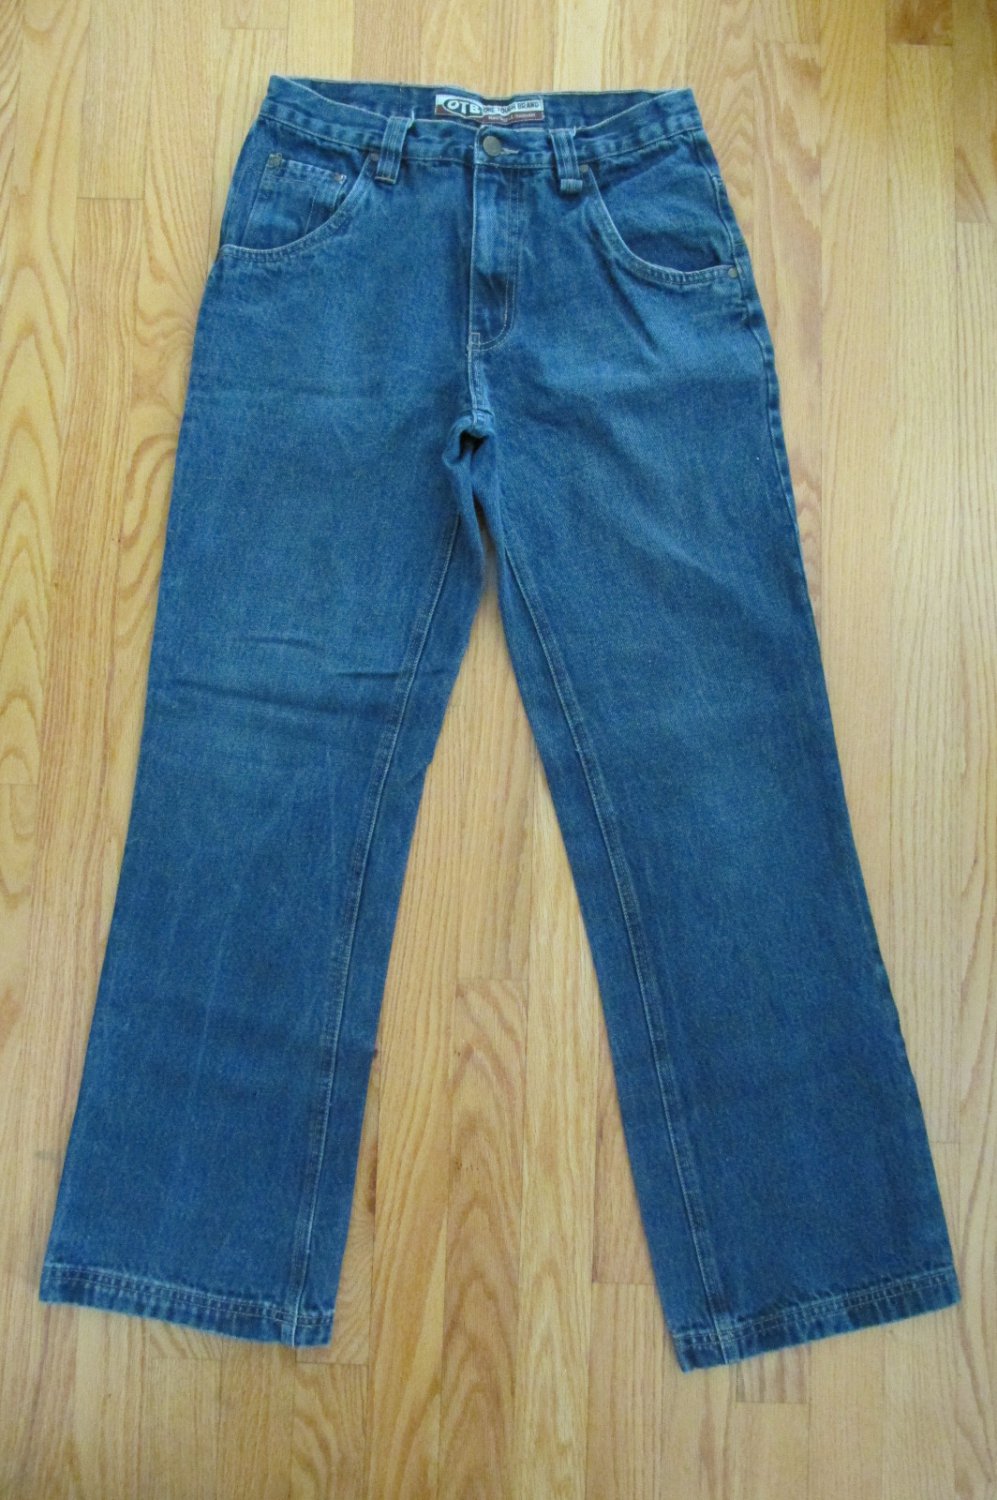 OTB ONE TOUGH BRAND MEN'S SIZE 29 X 30 JEANS MED BLUE STONE WASHED ...